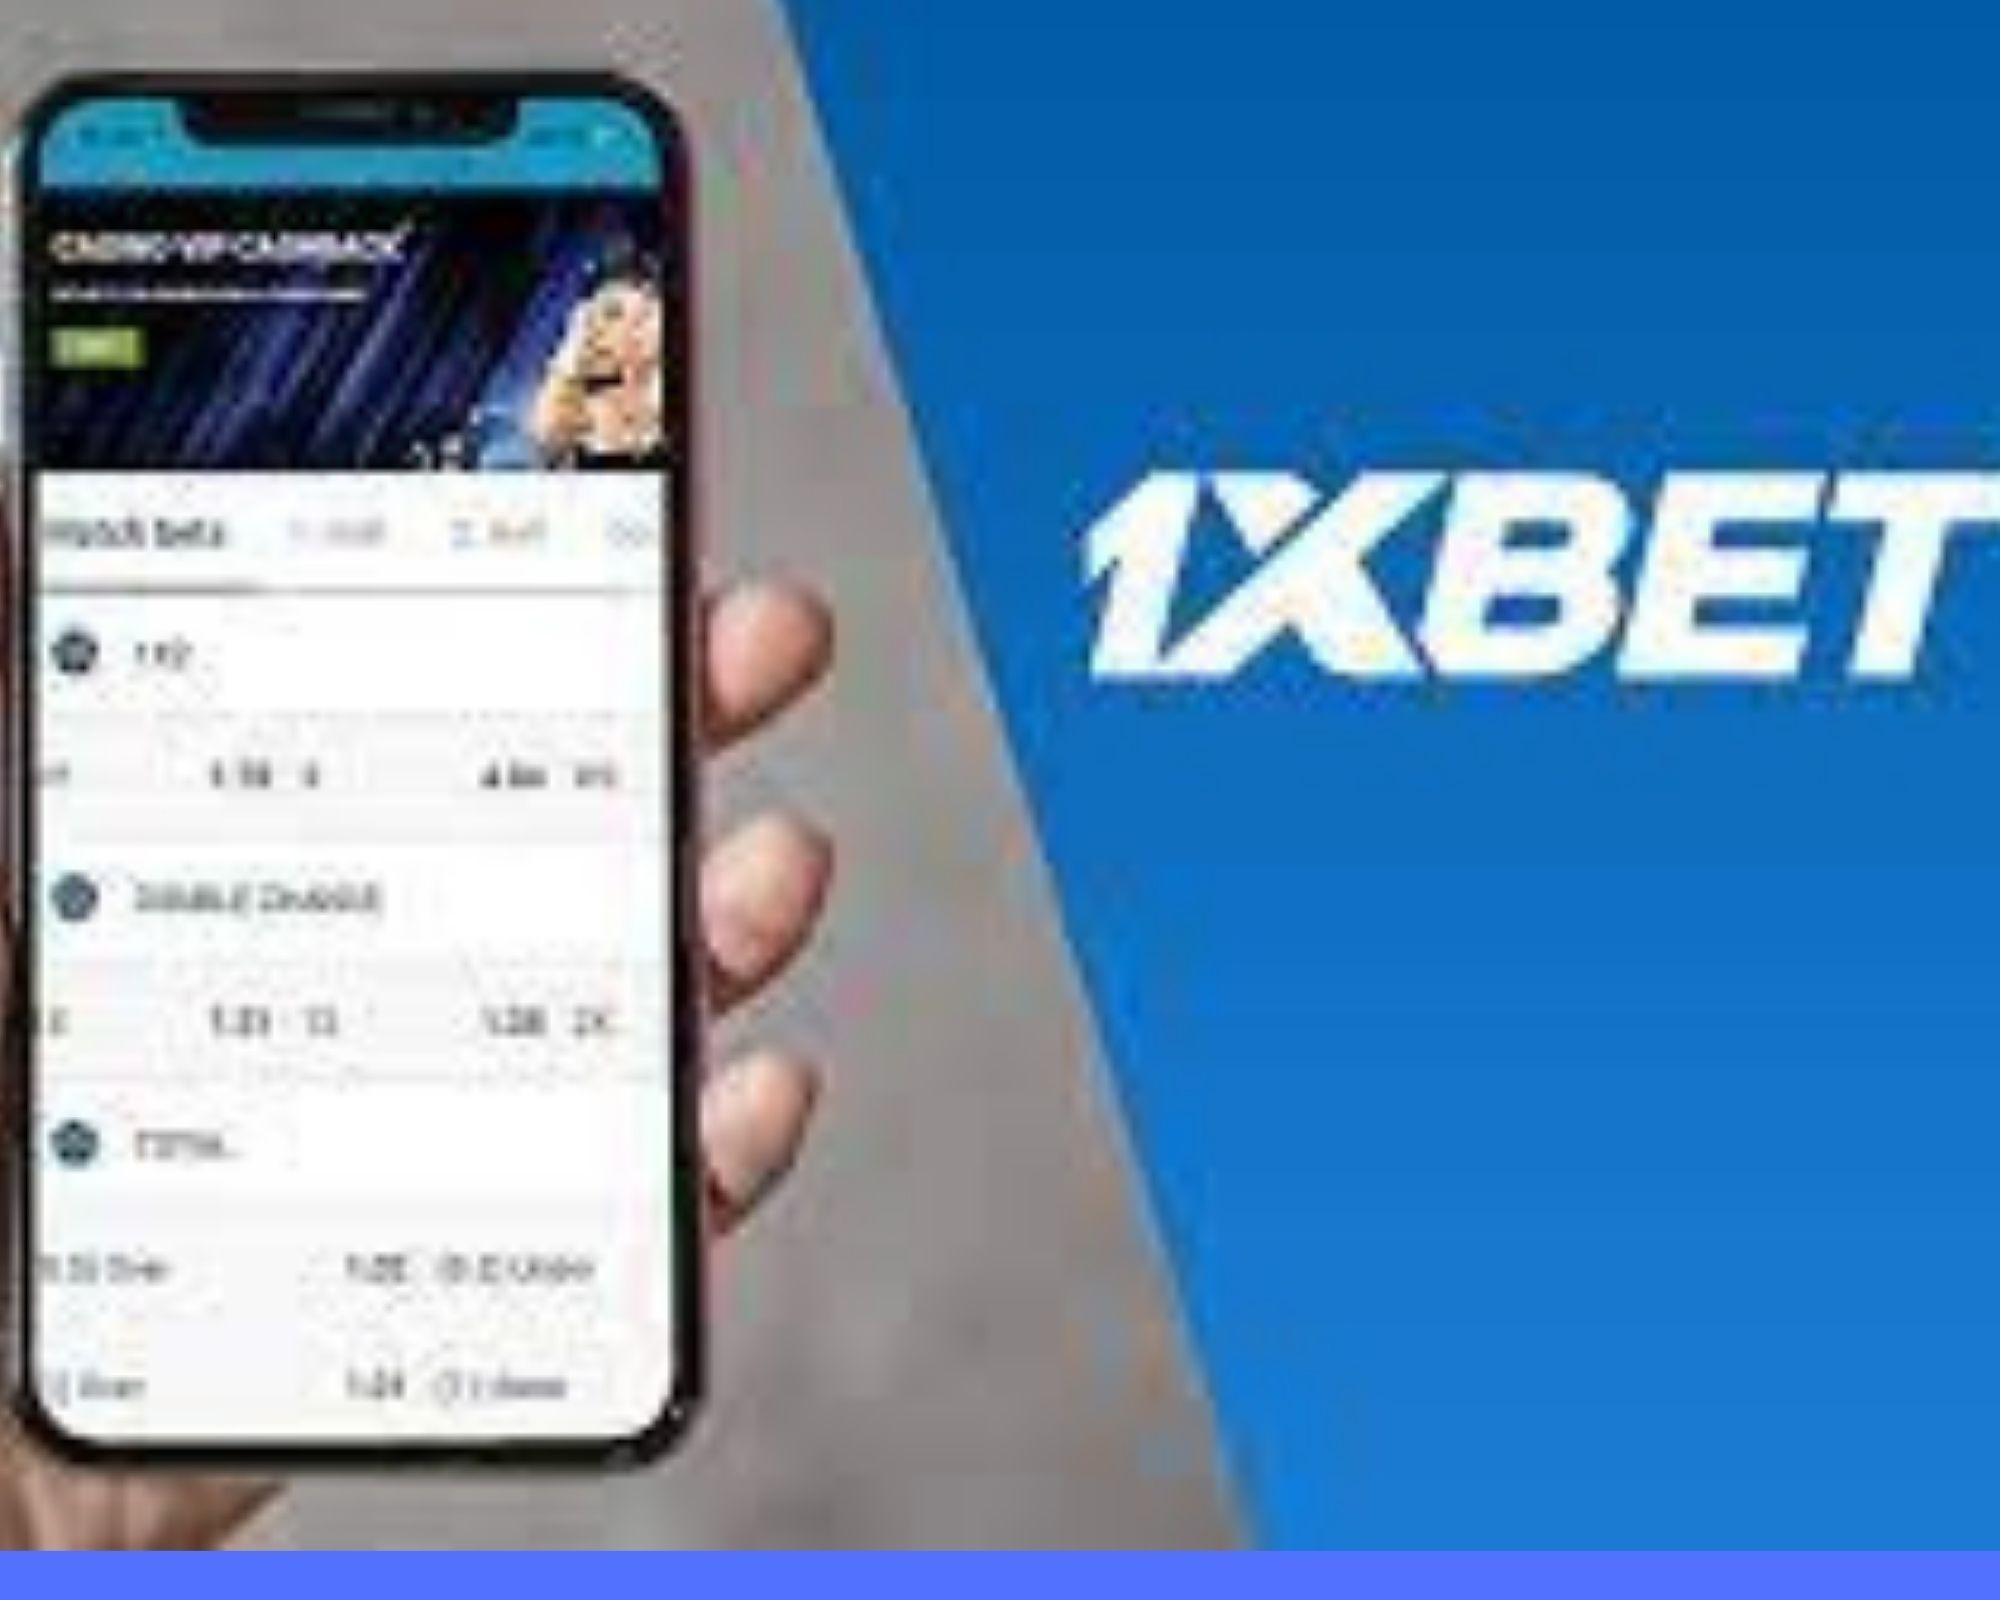 1xBet for Android